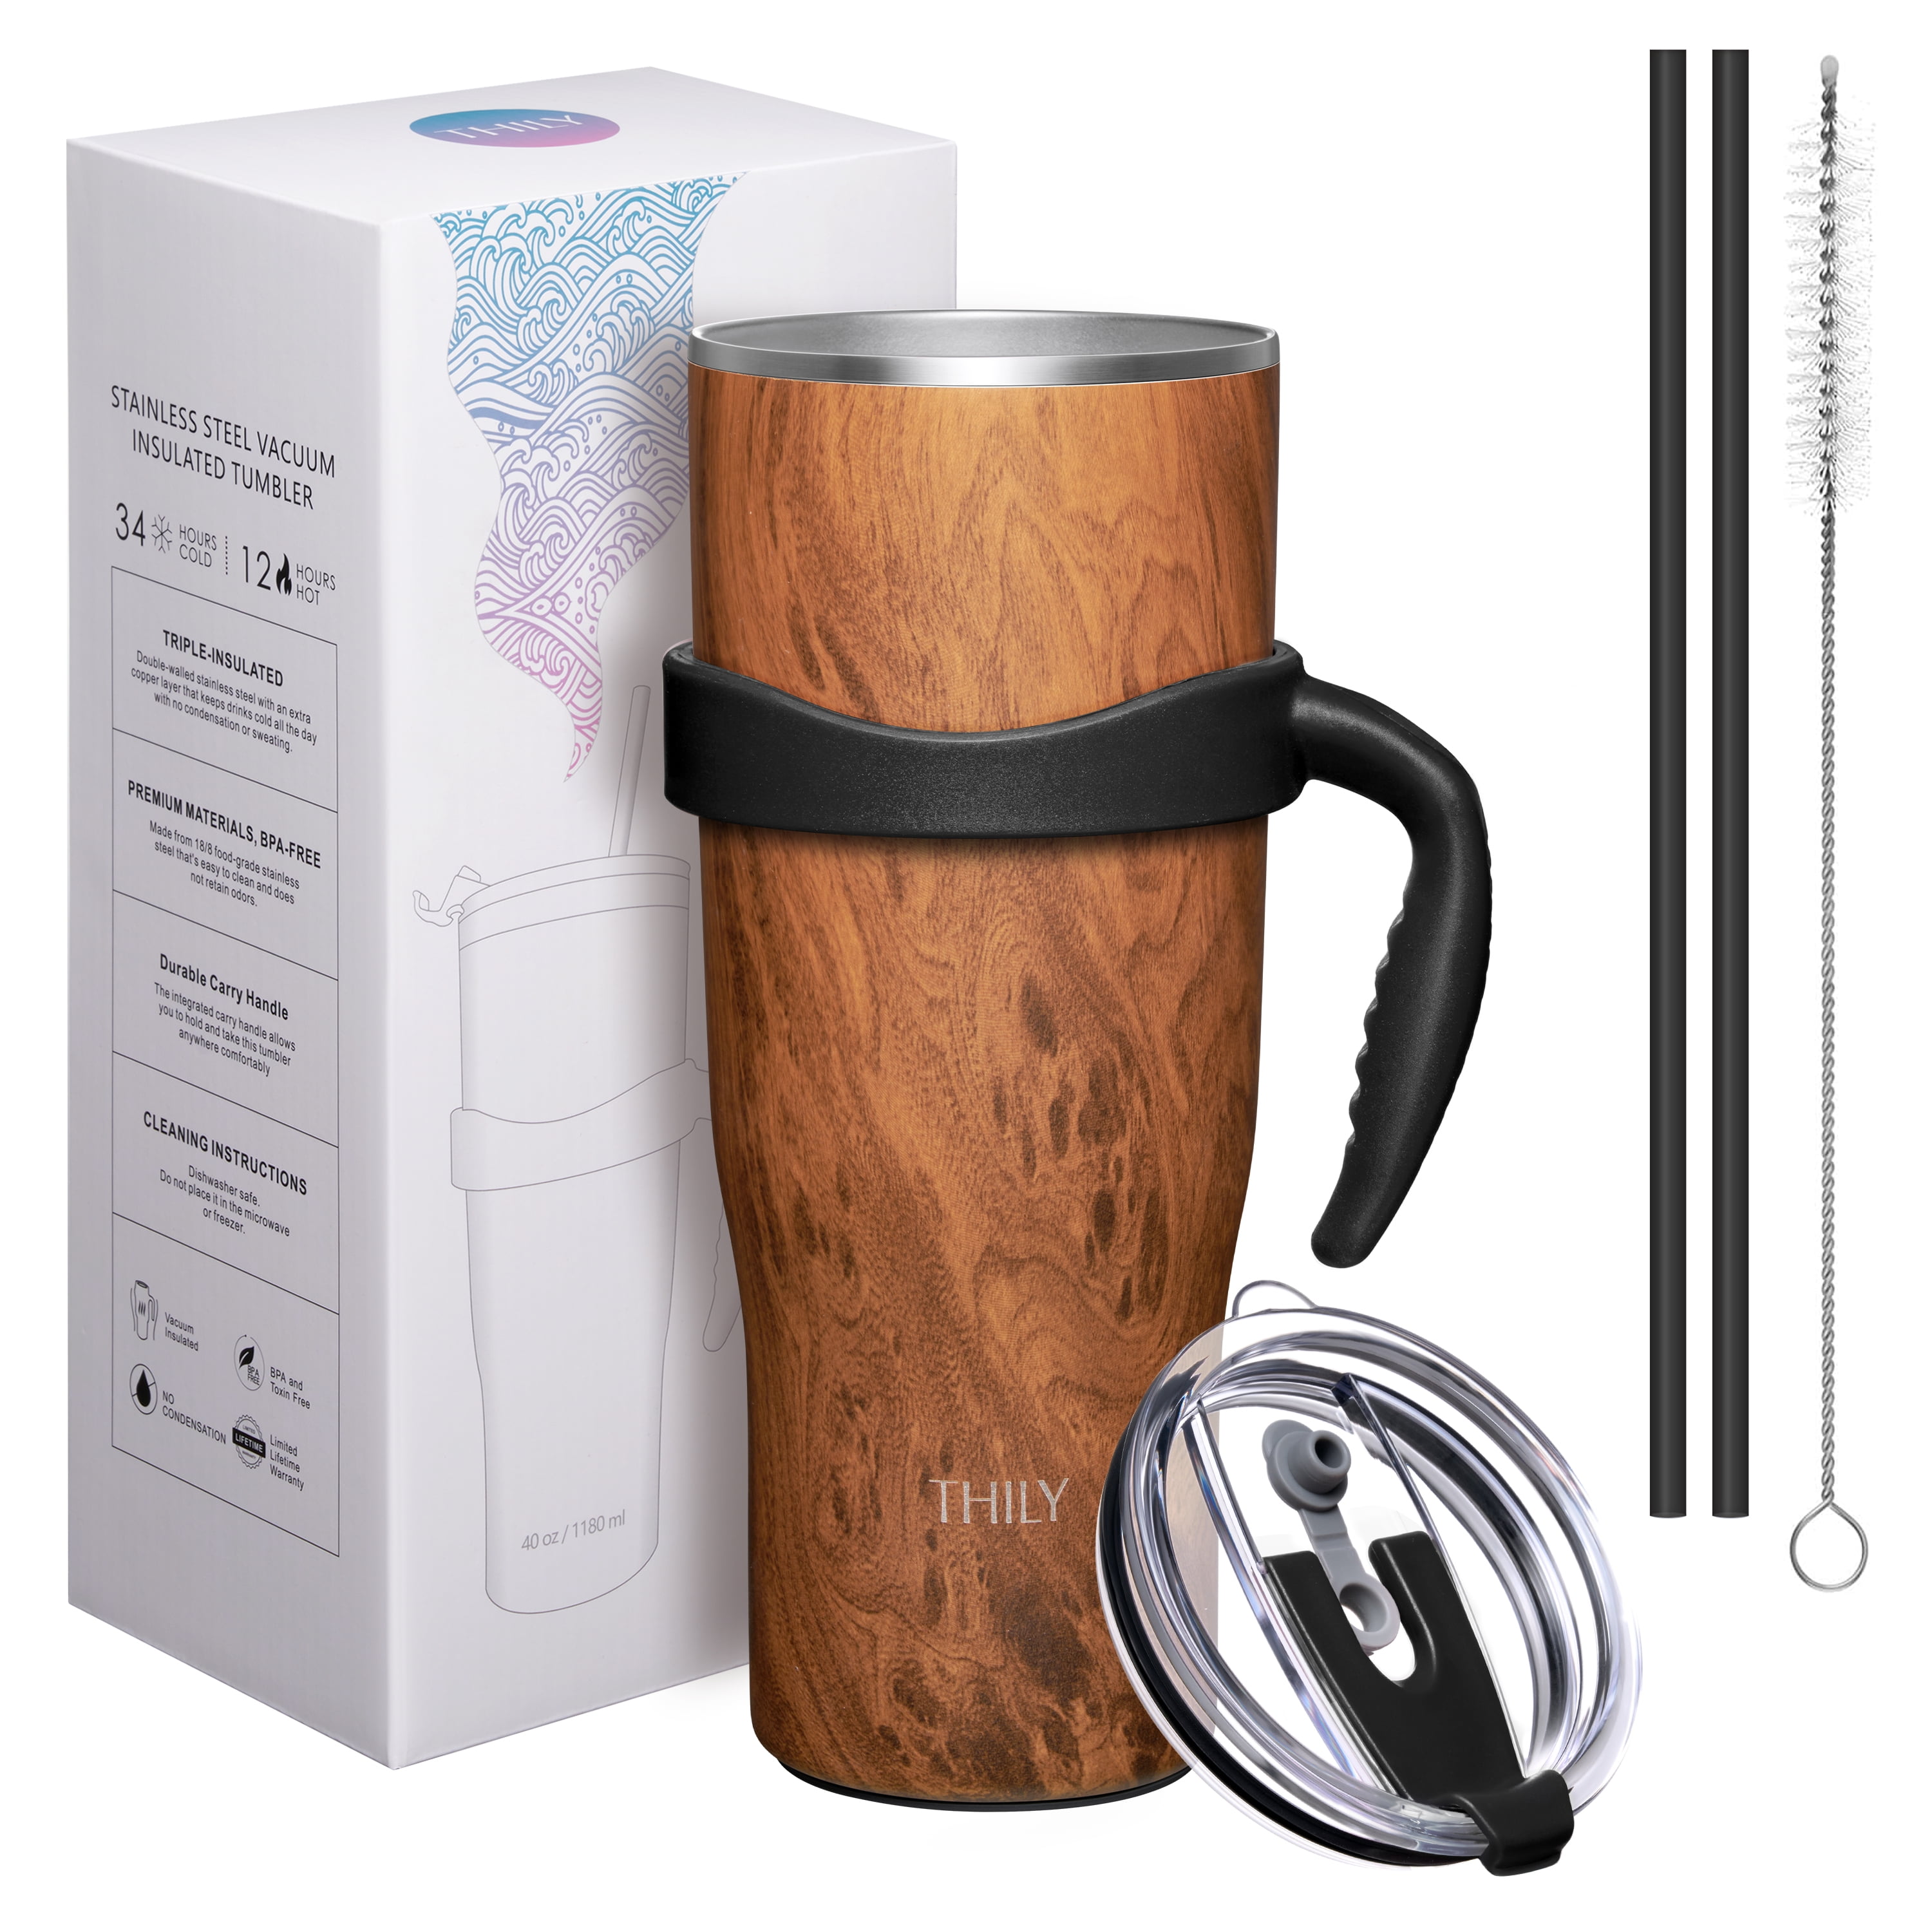 Stainless Steel Insulated Travel Mug - THILY 12 oz Vacuum Insulated Coffee Cup with Handle, Spill-Proof Lid, Powder Coated, BPA Free, Ombre: Black 